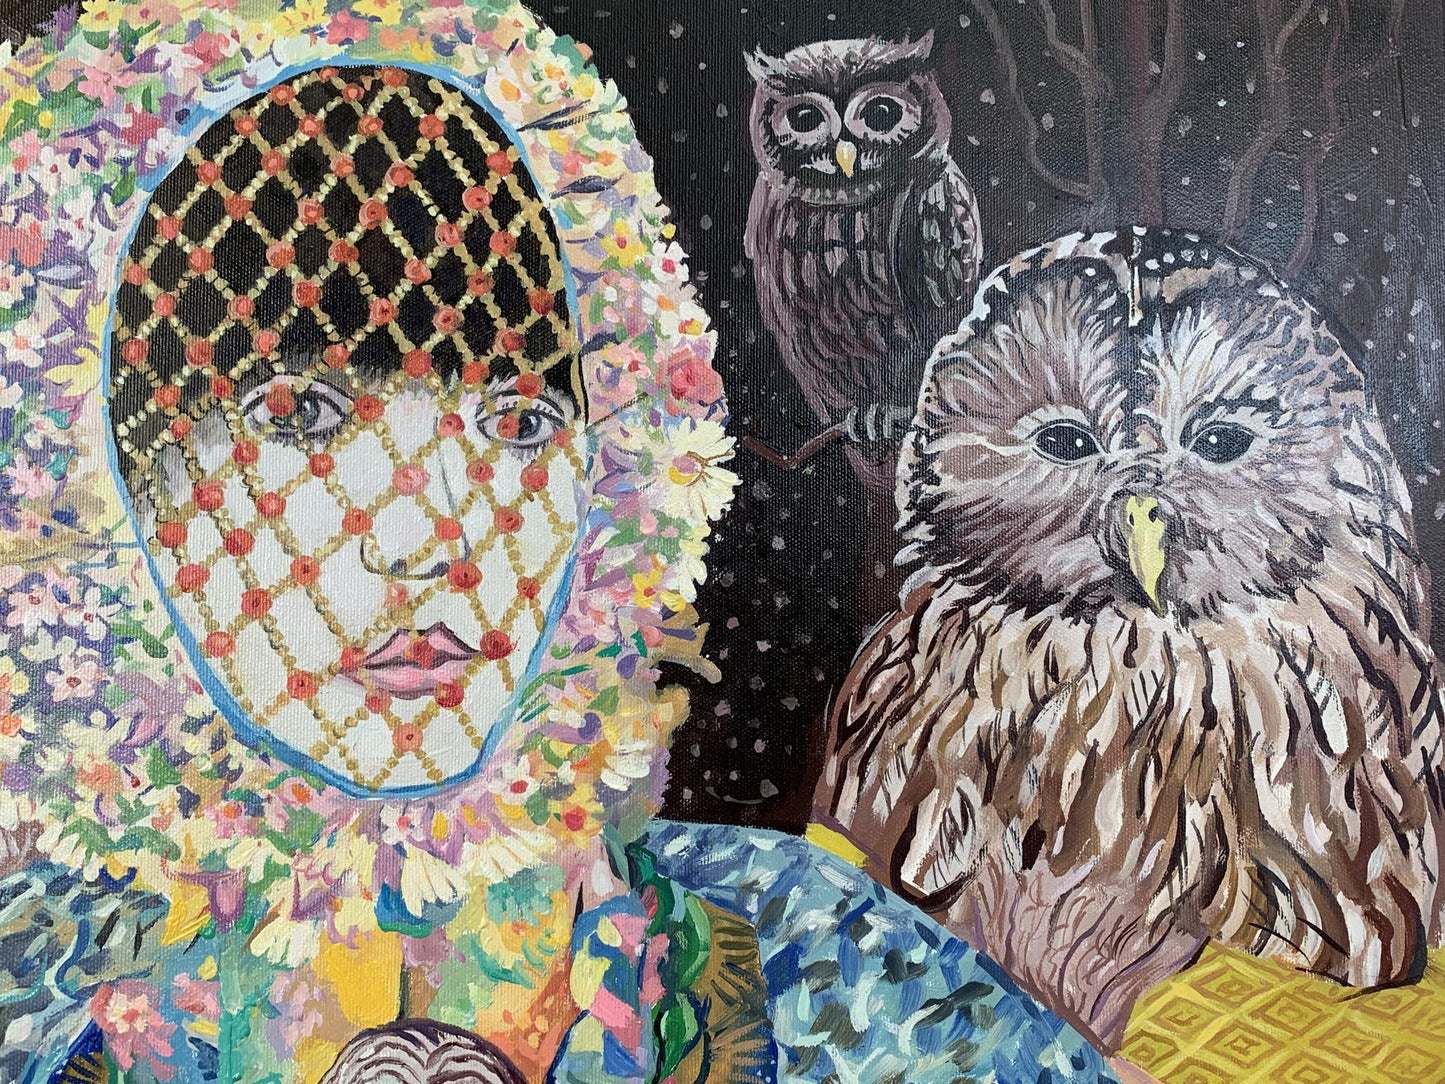 Oil painting Girl with owls V. Konotopsky